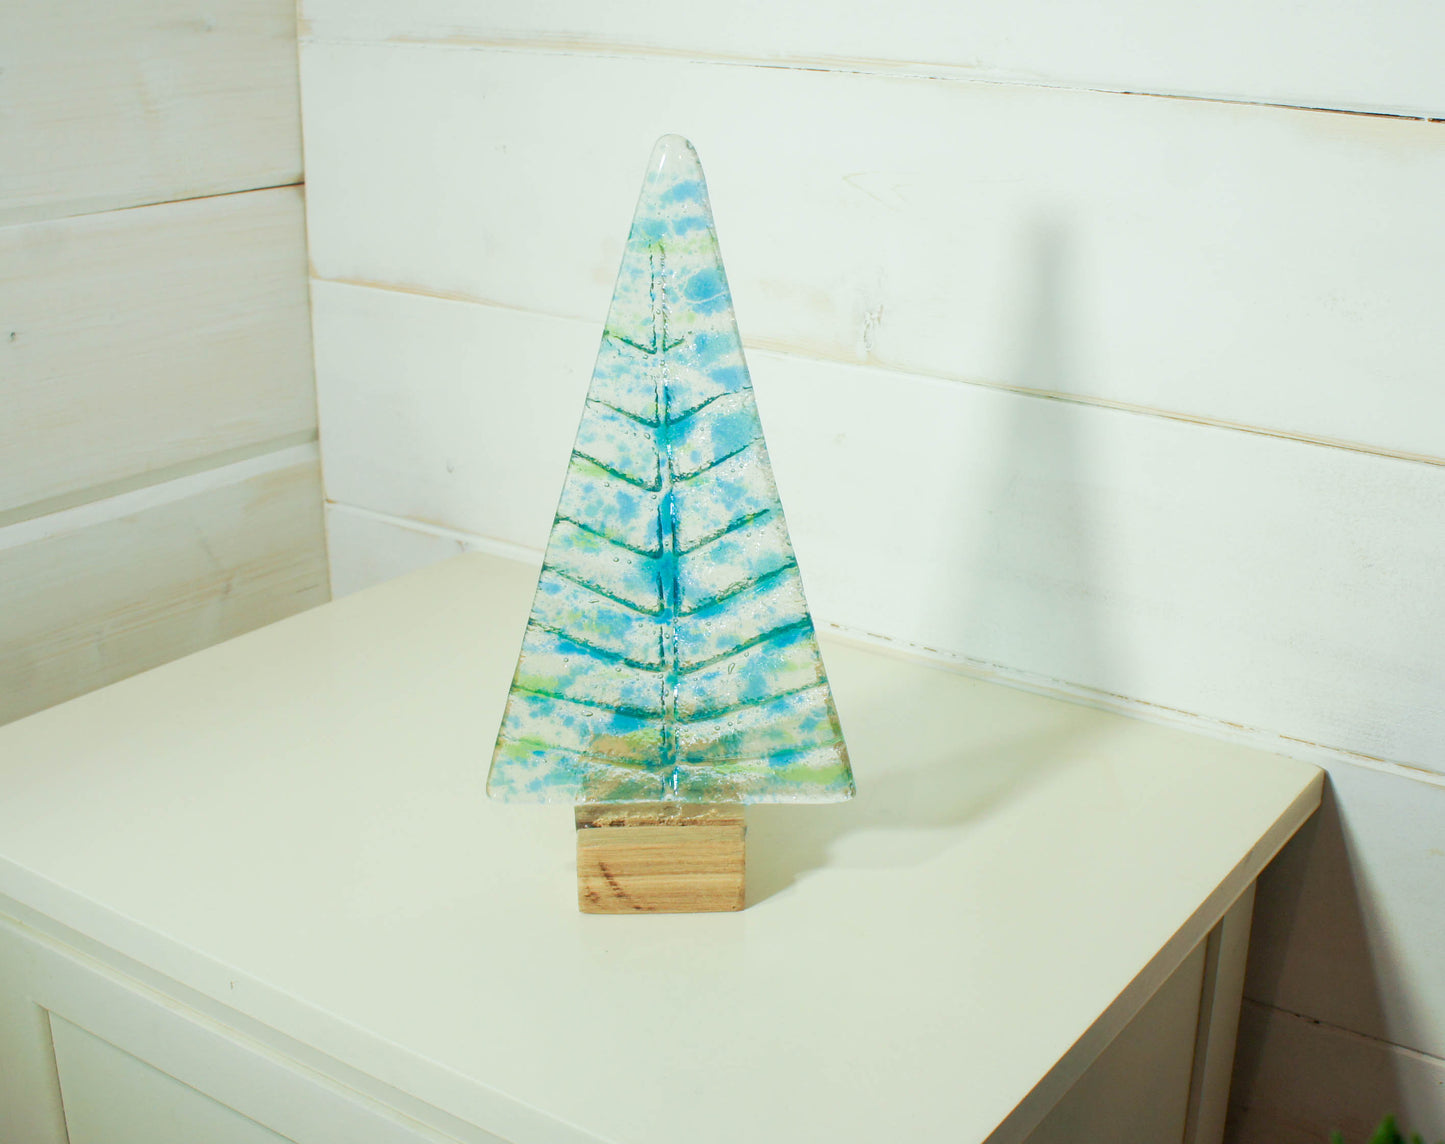 Large Fused Glass Christmas Tree Blue Green 22cm (8 1/2" tall), Blue & Green Fused Glass Christmas Tree Decoration with wooden block